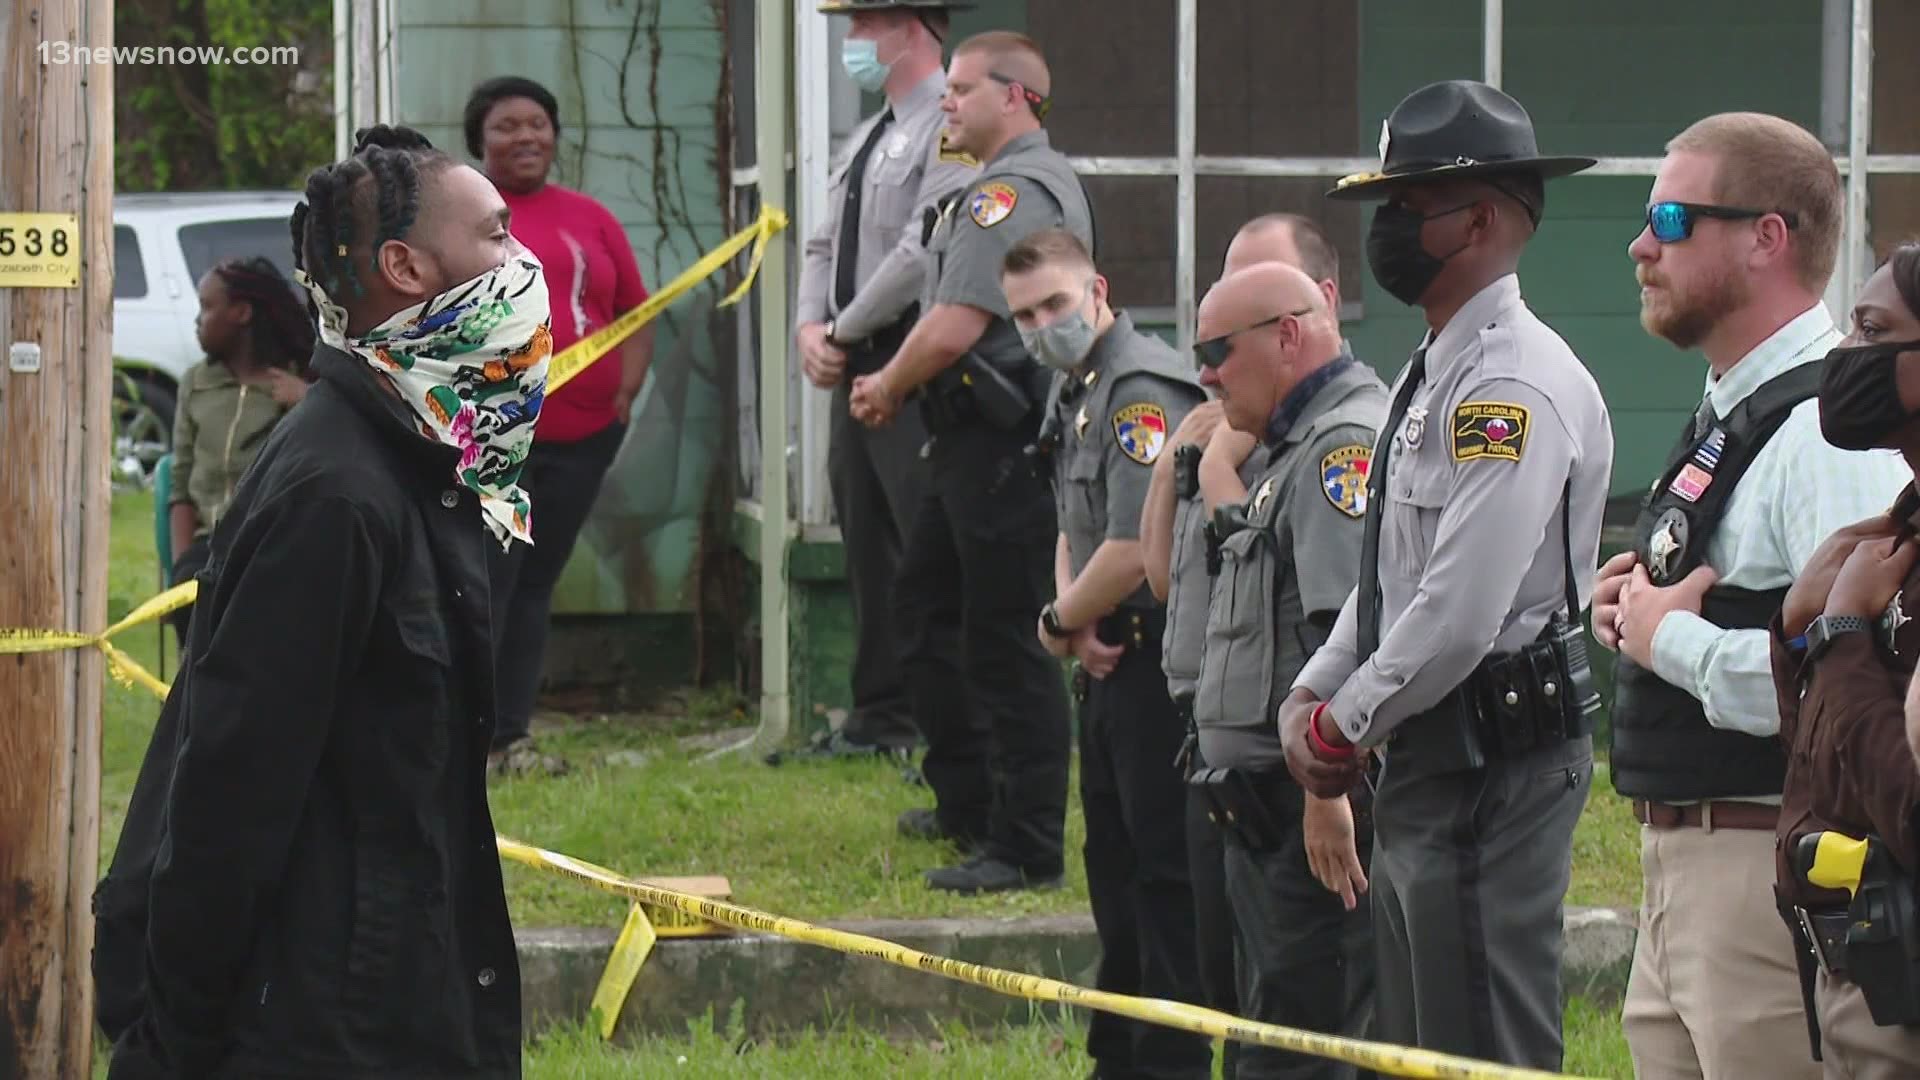 The community is demanding answers, after a Pasquotank County Sheriff's deputy shot and killed a man Wednesday while serving a search warrant.